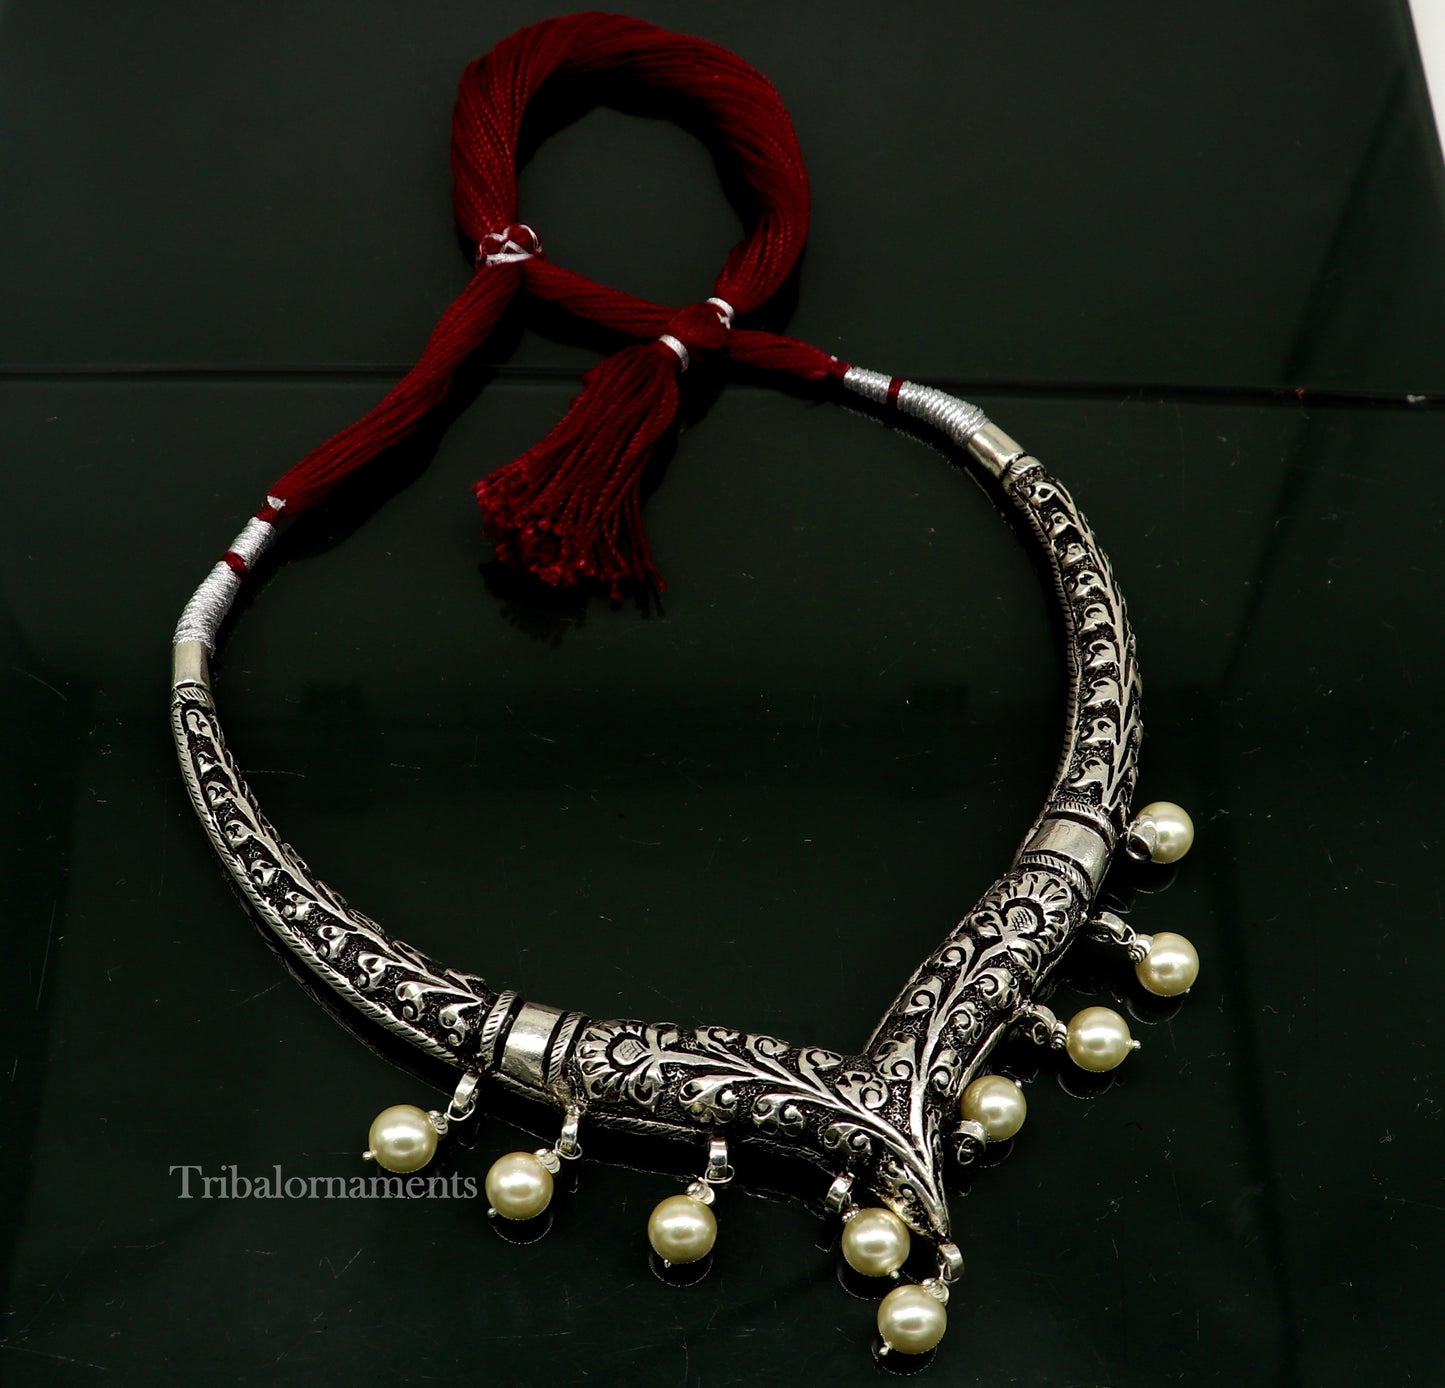 Vintage Indian traditional style trendy 92.5 sterling silver chitai/kandrai work charm necklace, choker tribal ethnic jewelry nec278 - TRIBAL ORNAMENTS